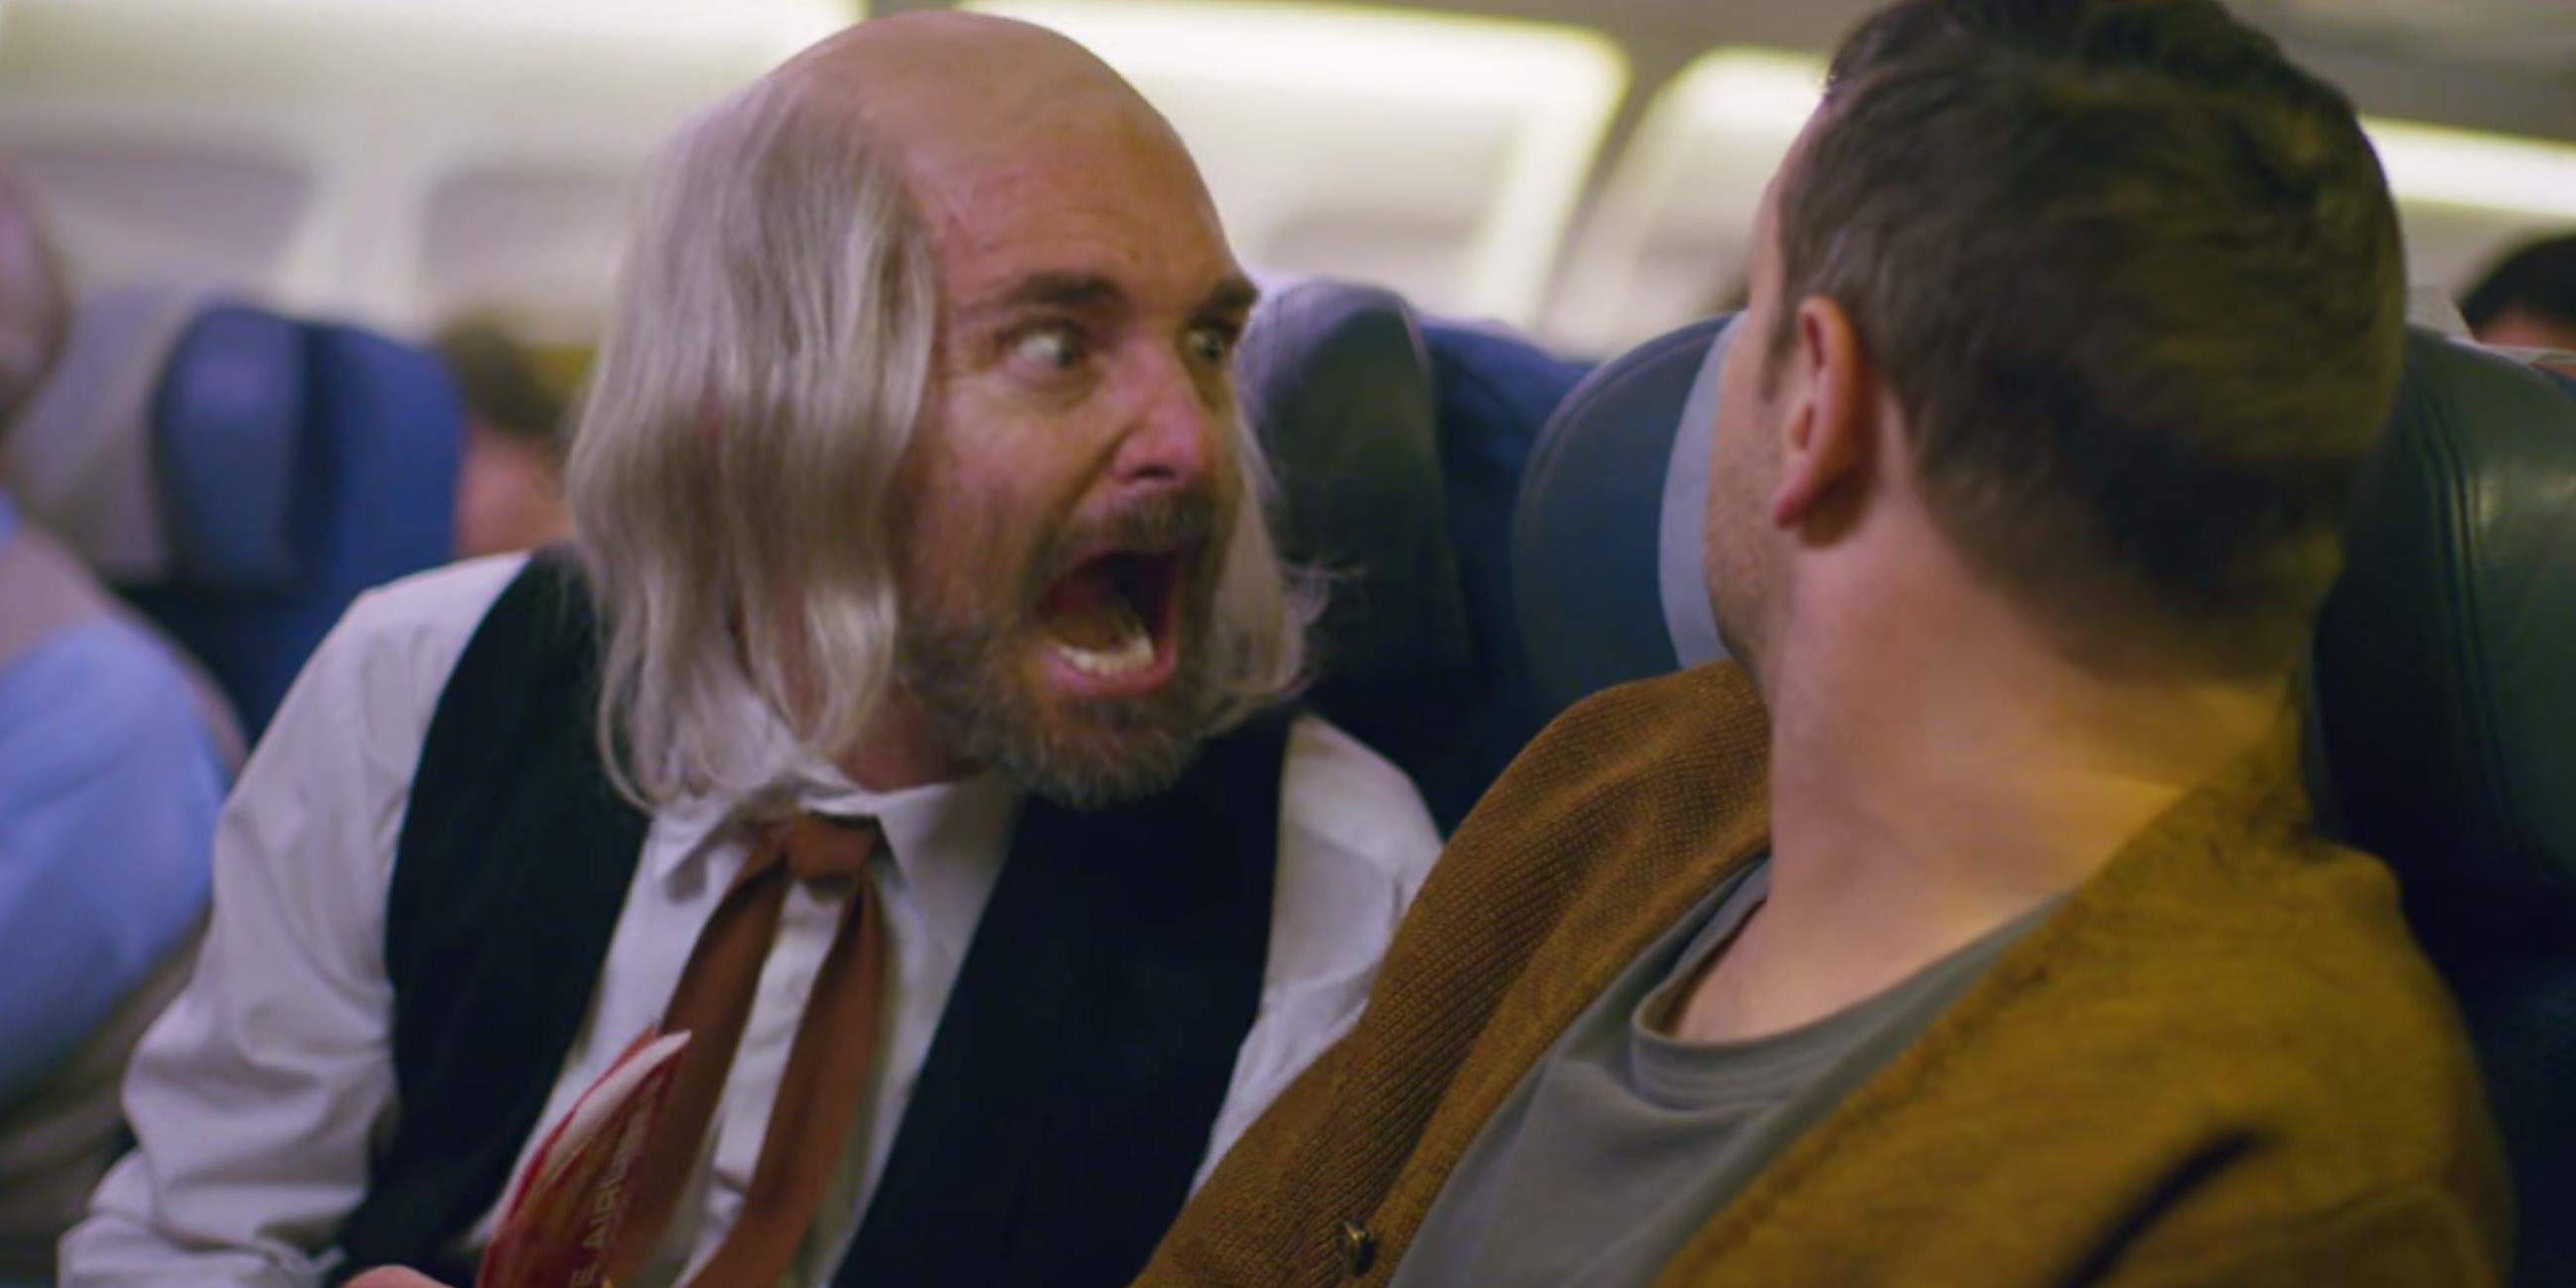 Will Forte screams at Tim Robinson on an airplane in I Think You Should Leave